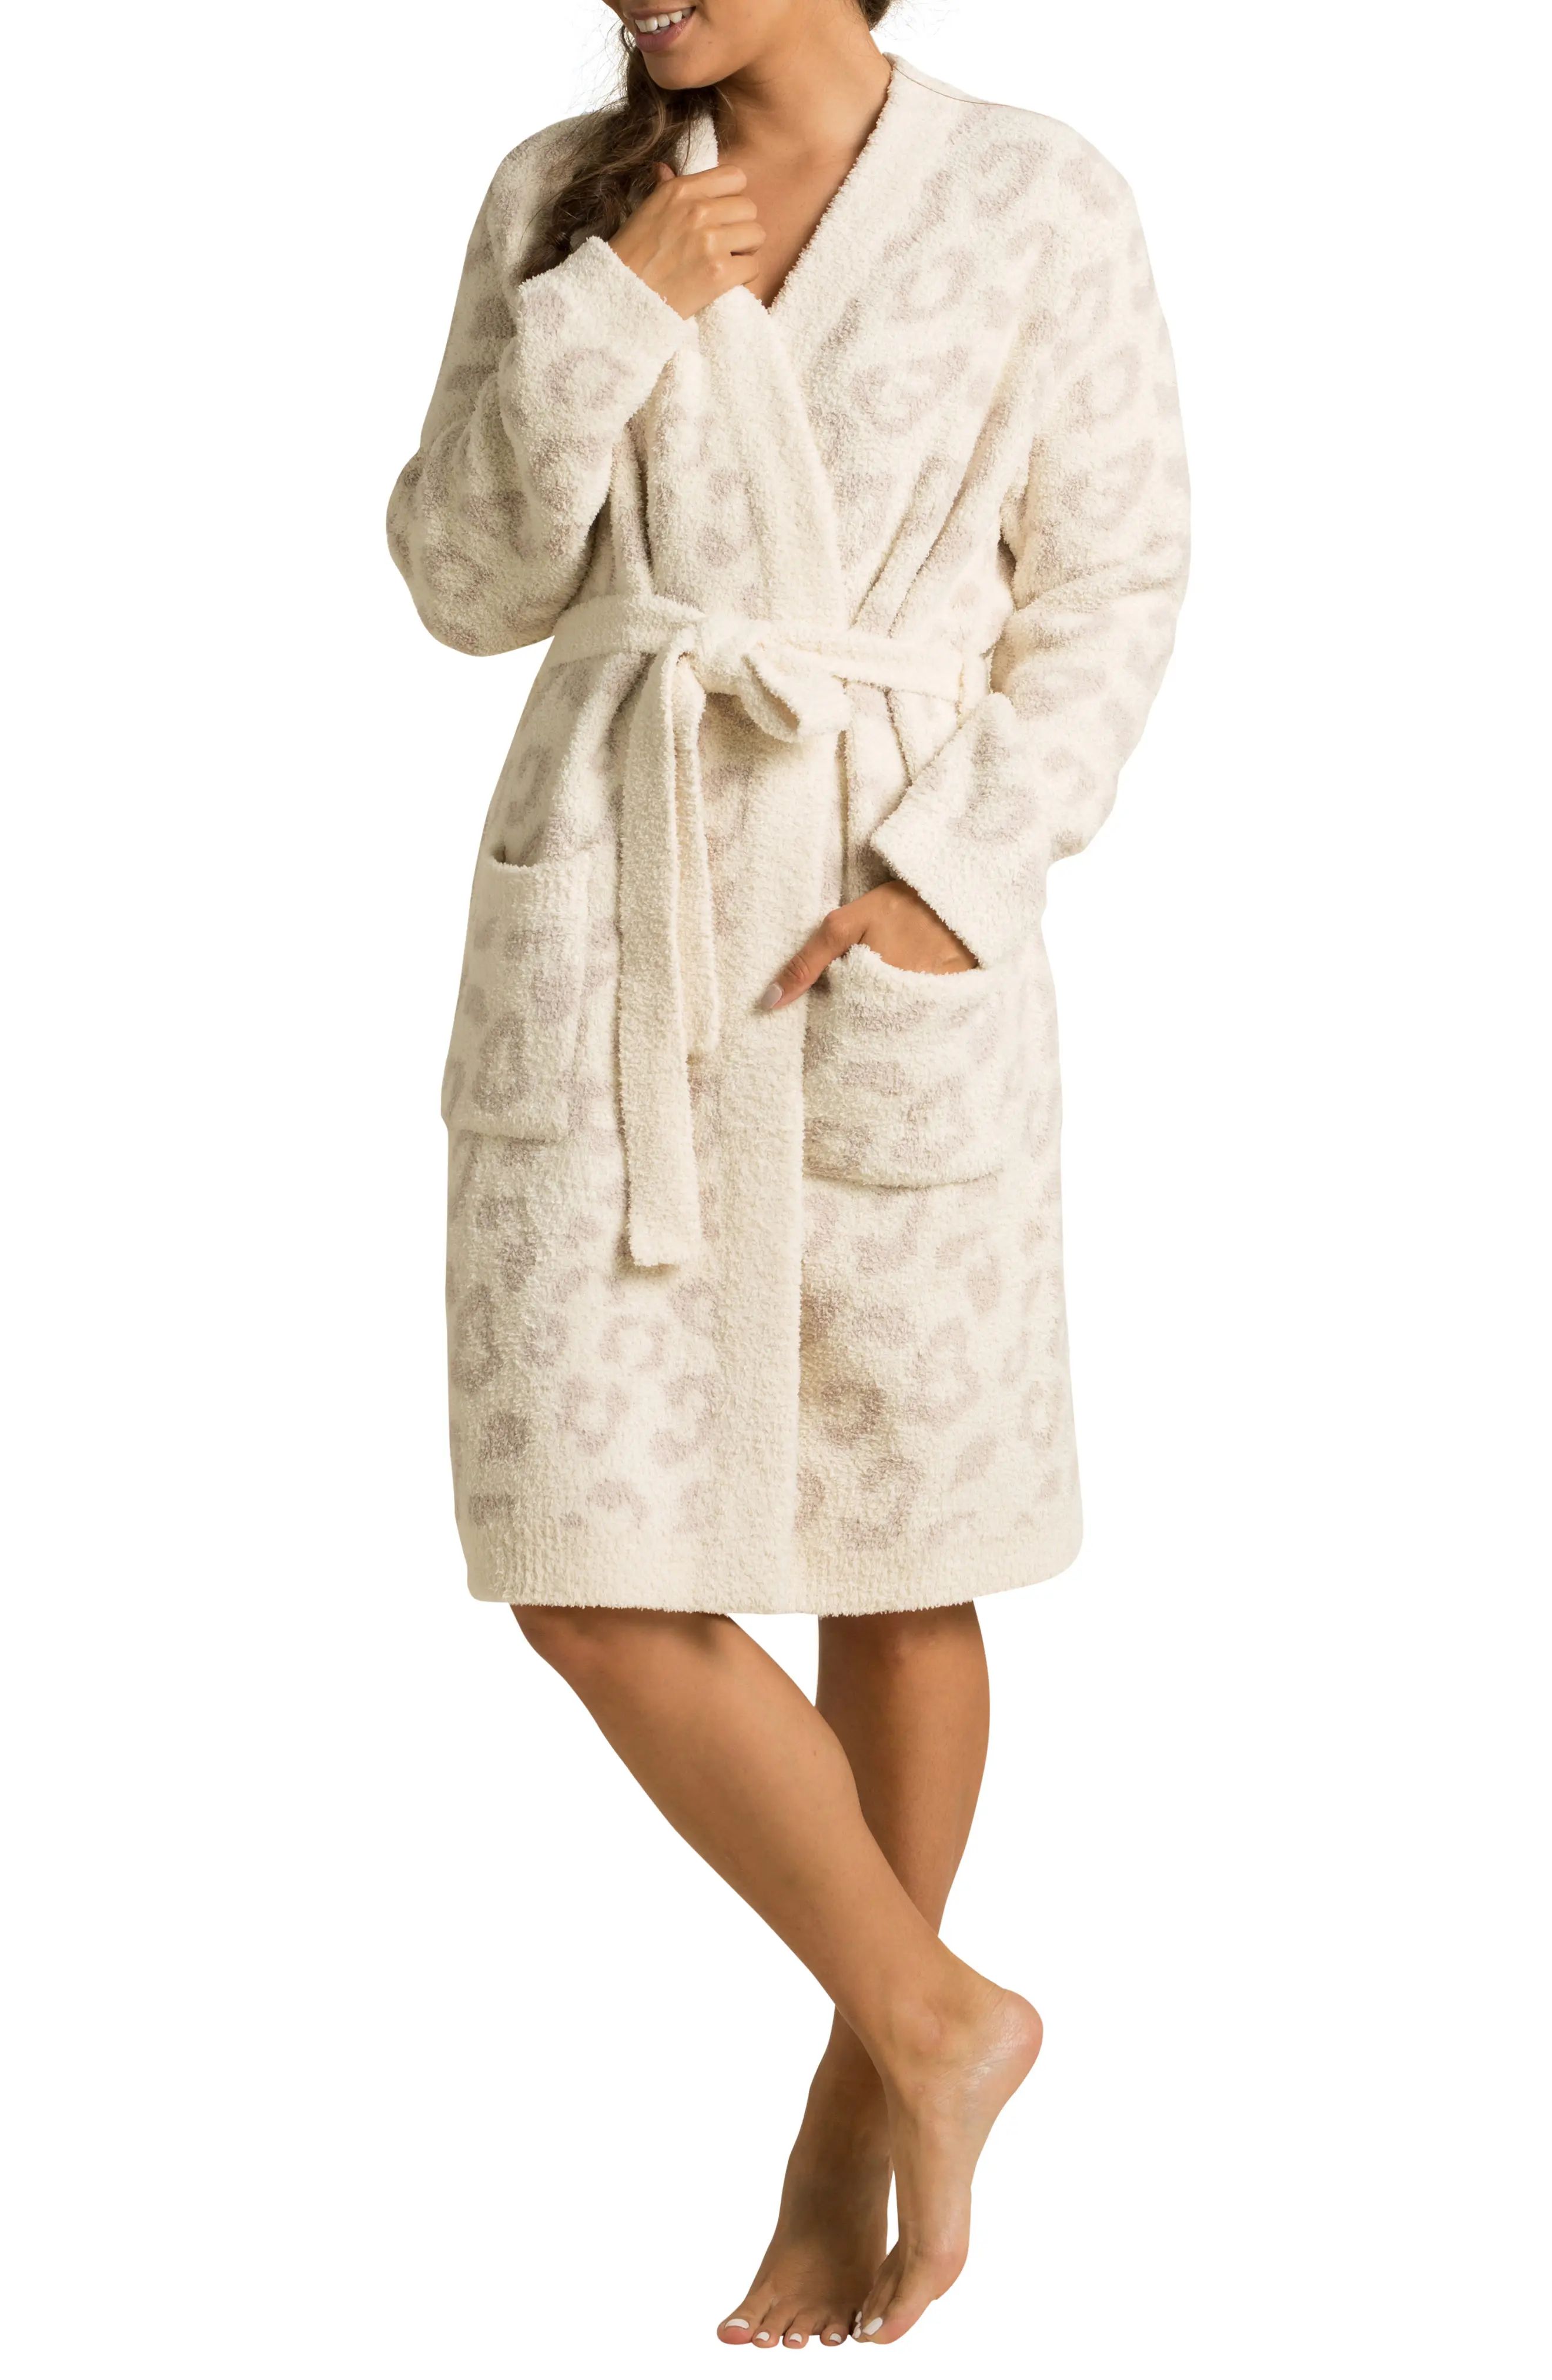 Barefoot Dreams(R) CozyChic(R) Robe in Cream/Stone at Nordstrom, Size X-Large | Nordstrom